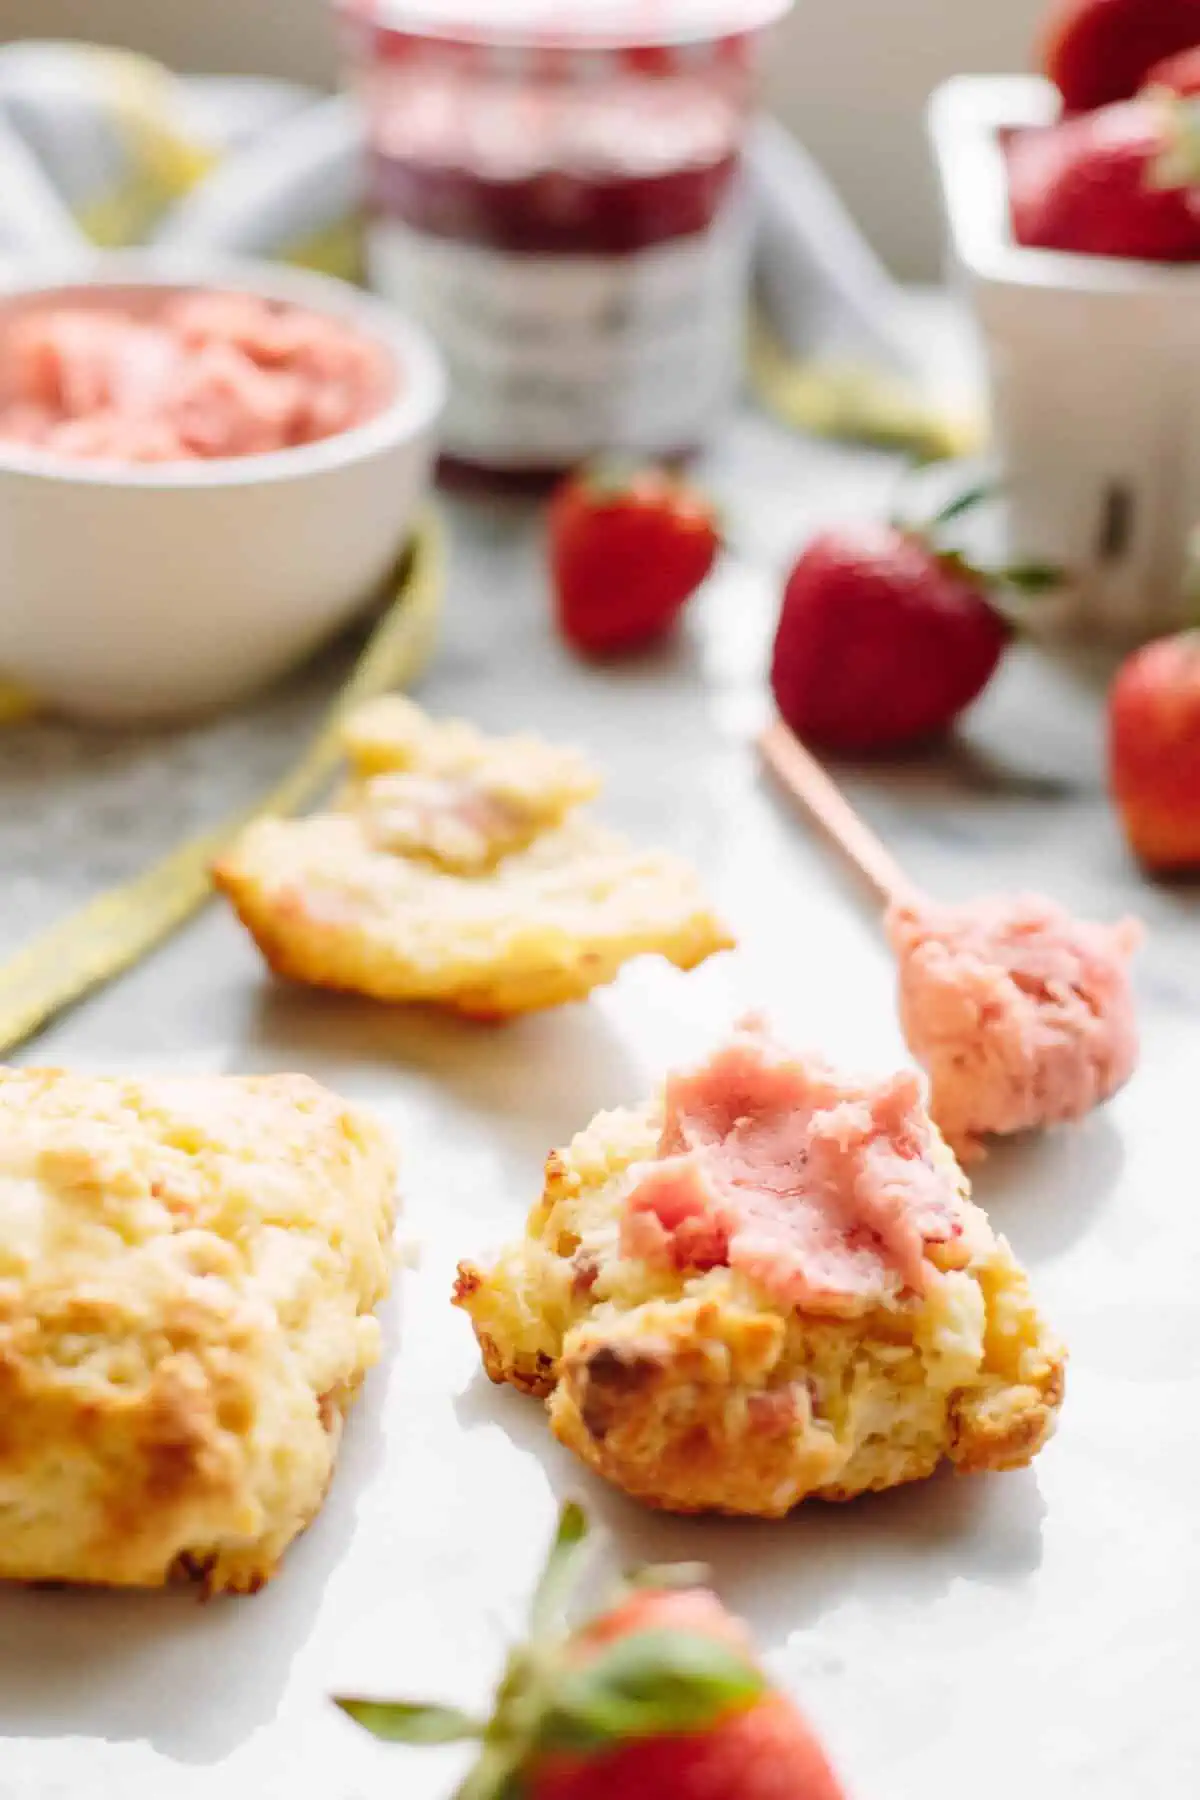 Freshly made strawberry butter spread on top of a prosciutto scone.